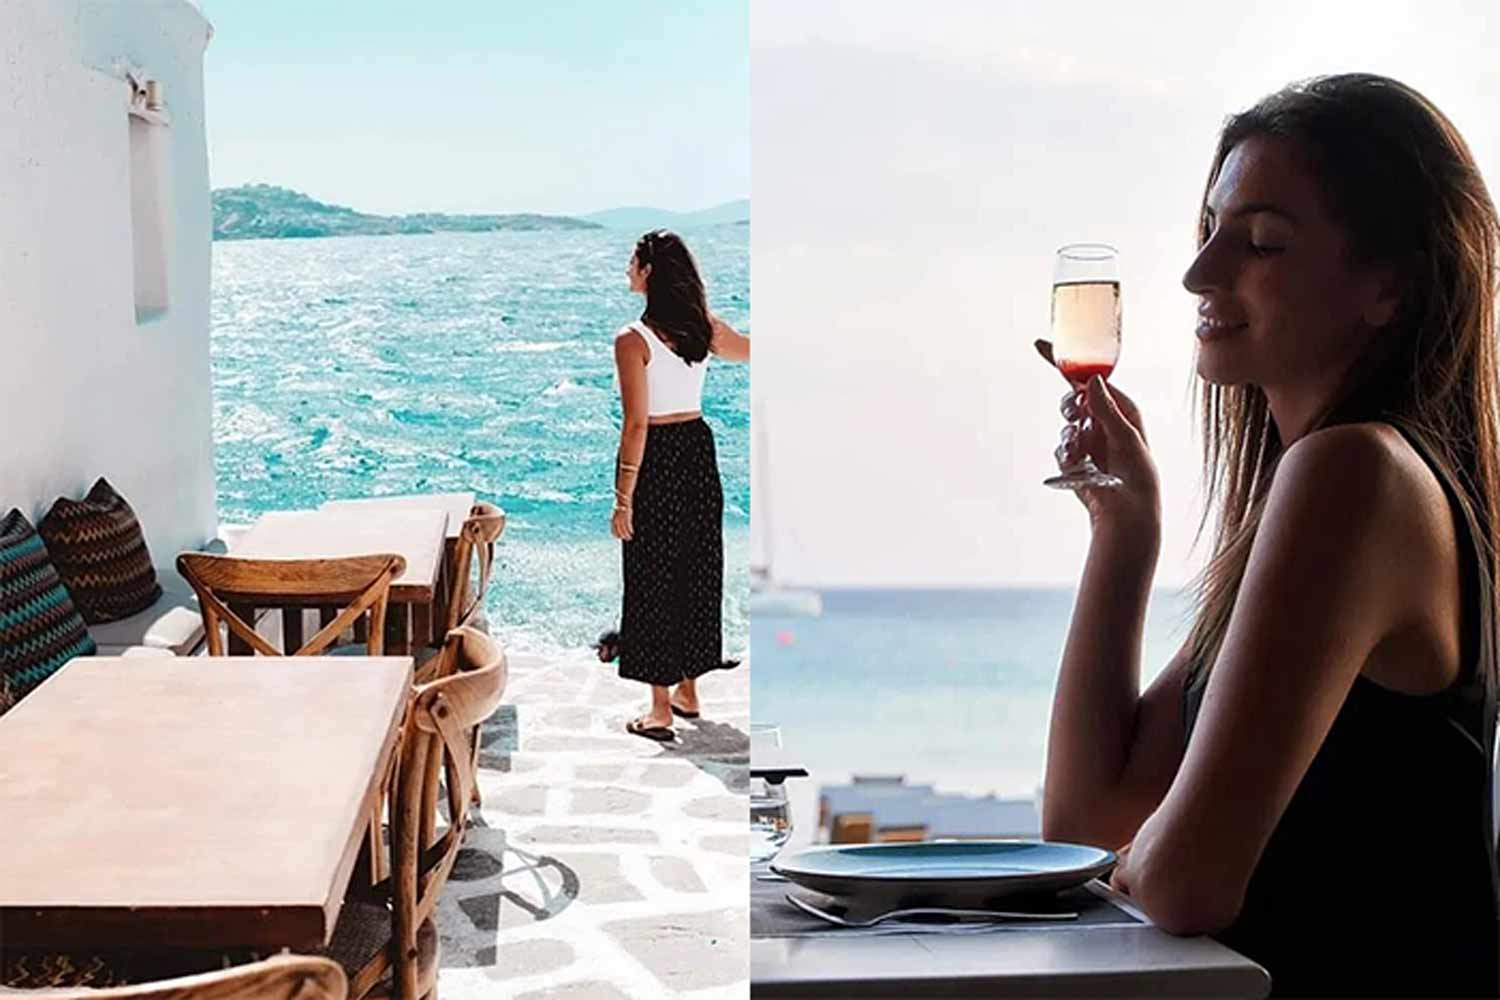 Tourists Warned To Avoid Sneaky Mykonos Restaurant Scam